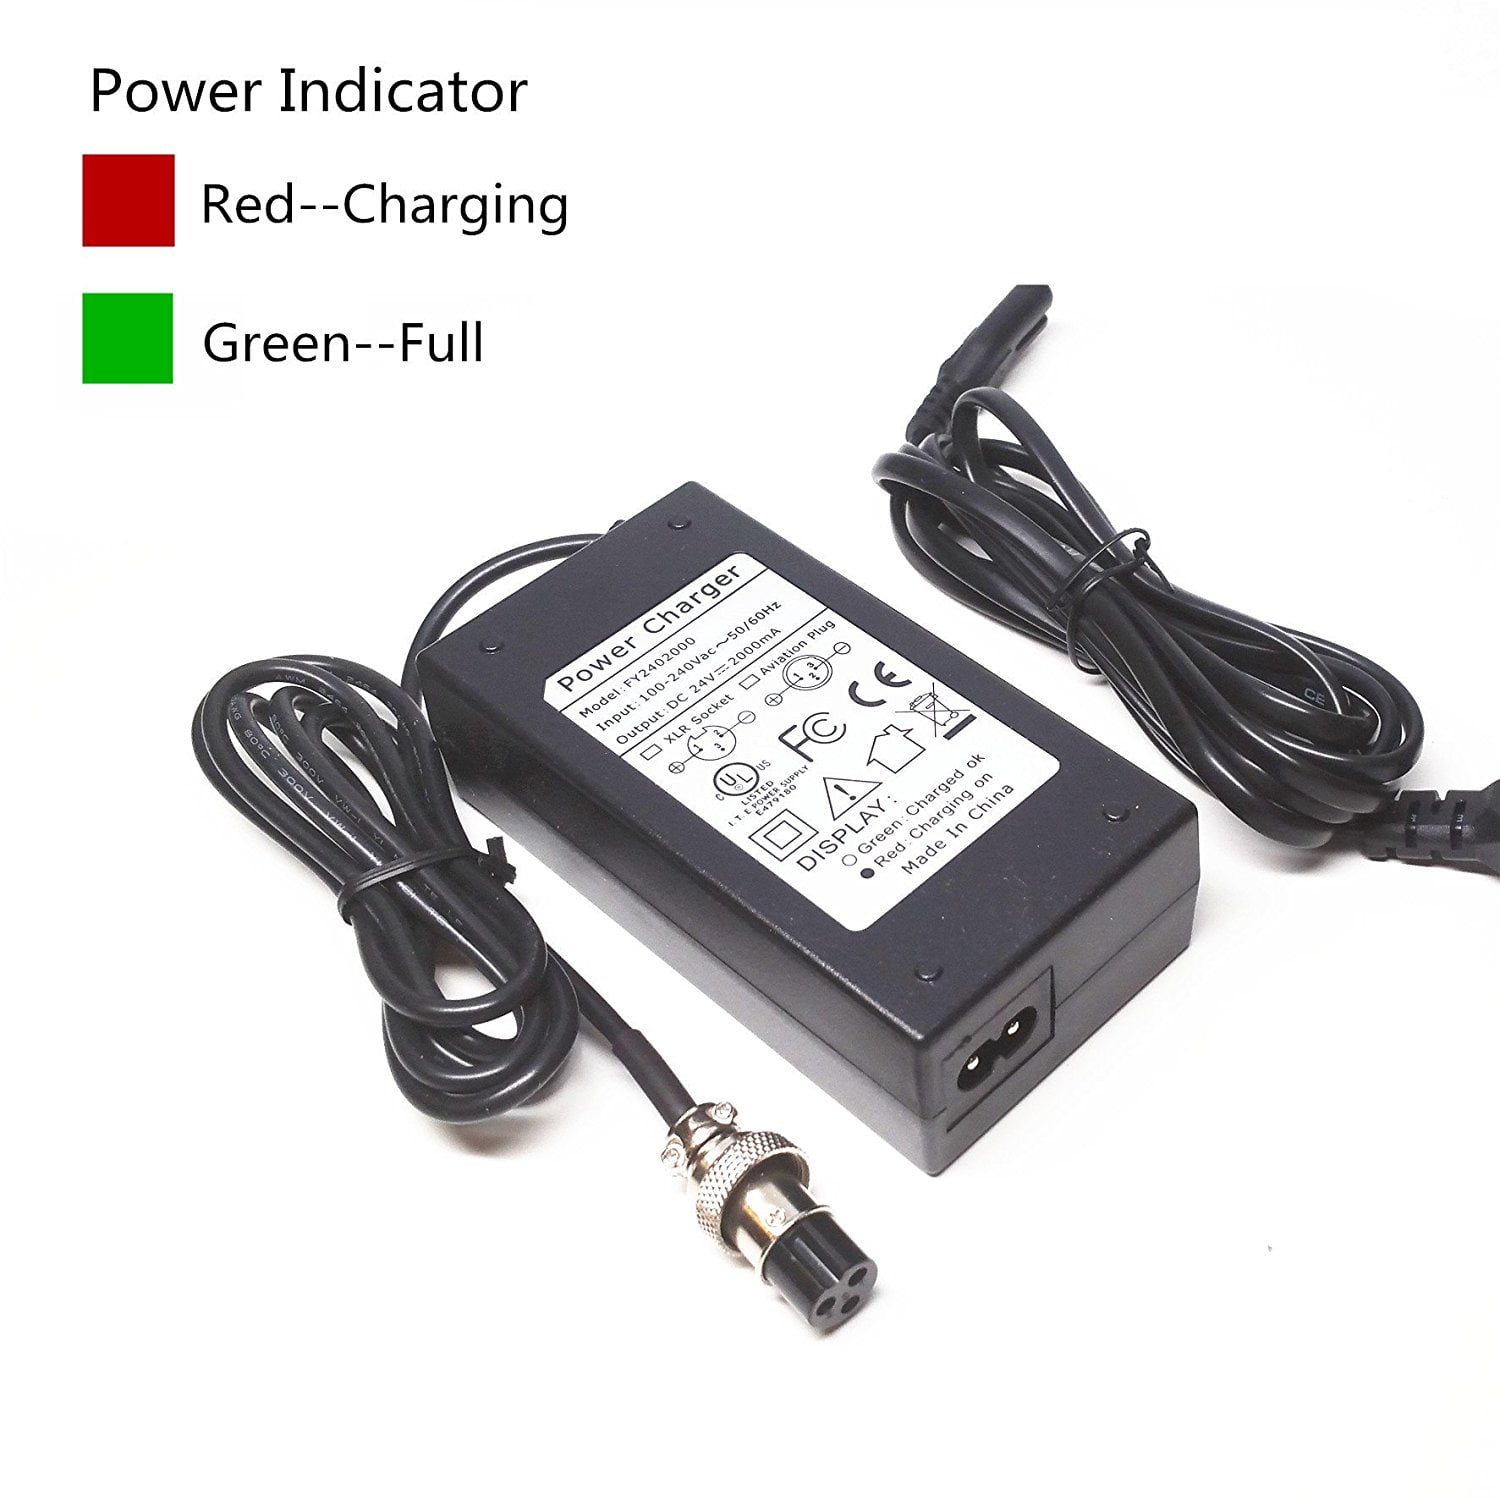 36V 1.5A Electric Scooter Battery Charger For Razor MX500 MX650 Dirt Rocket Bike 